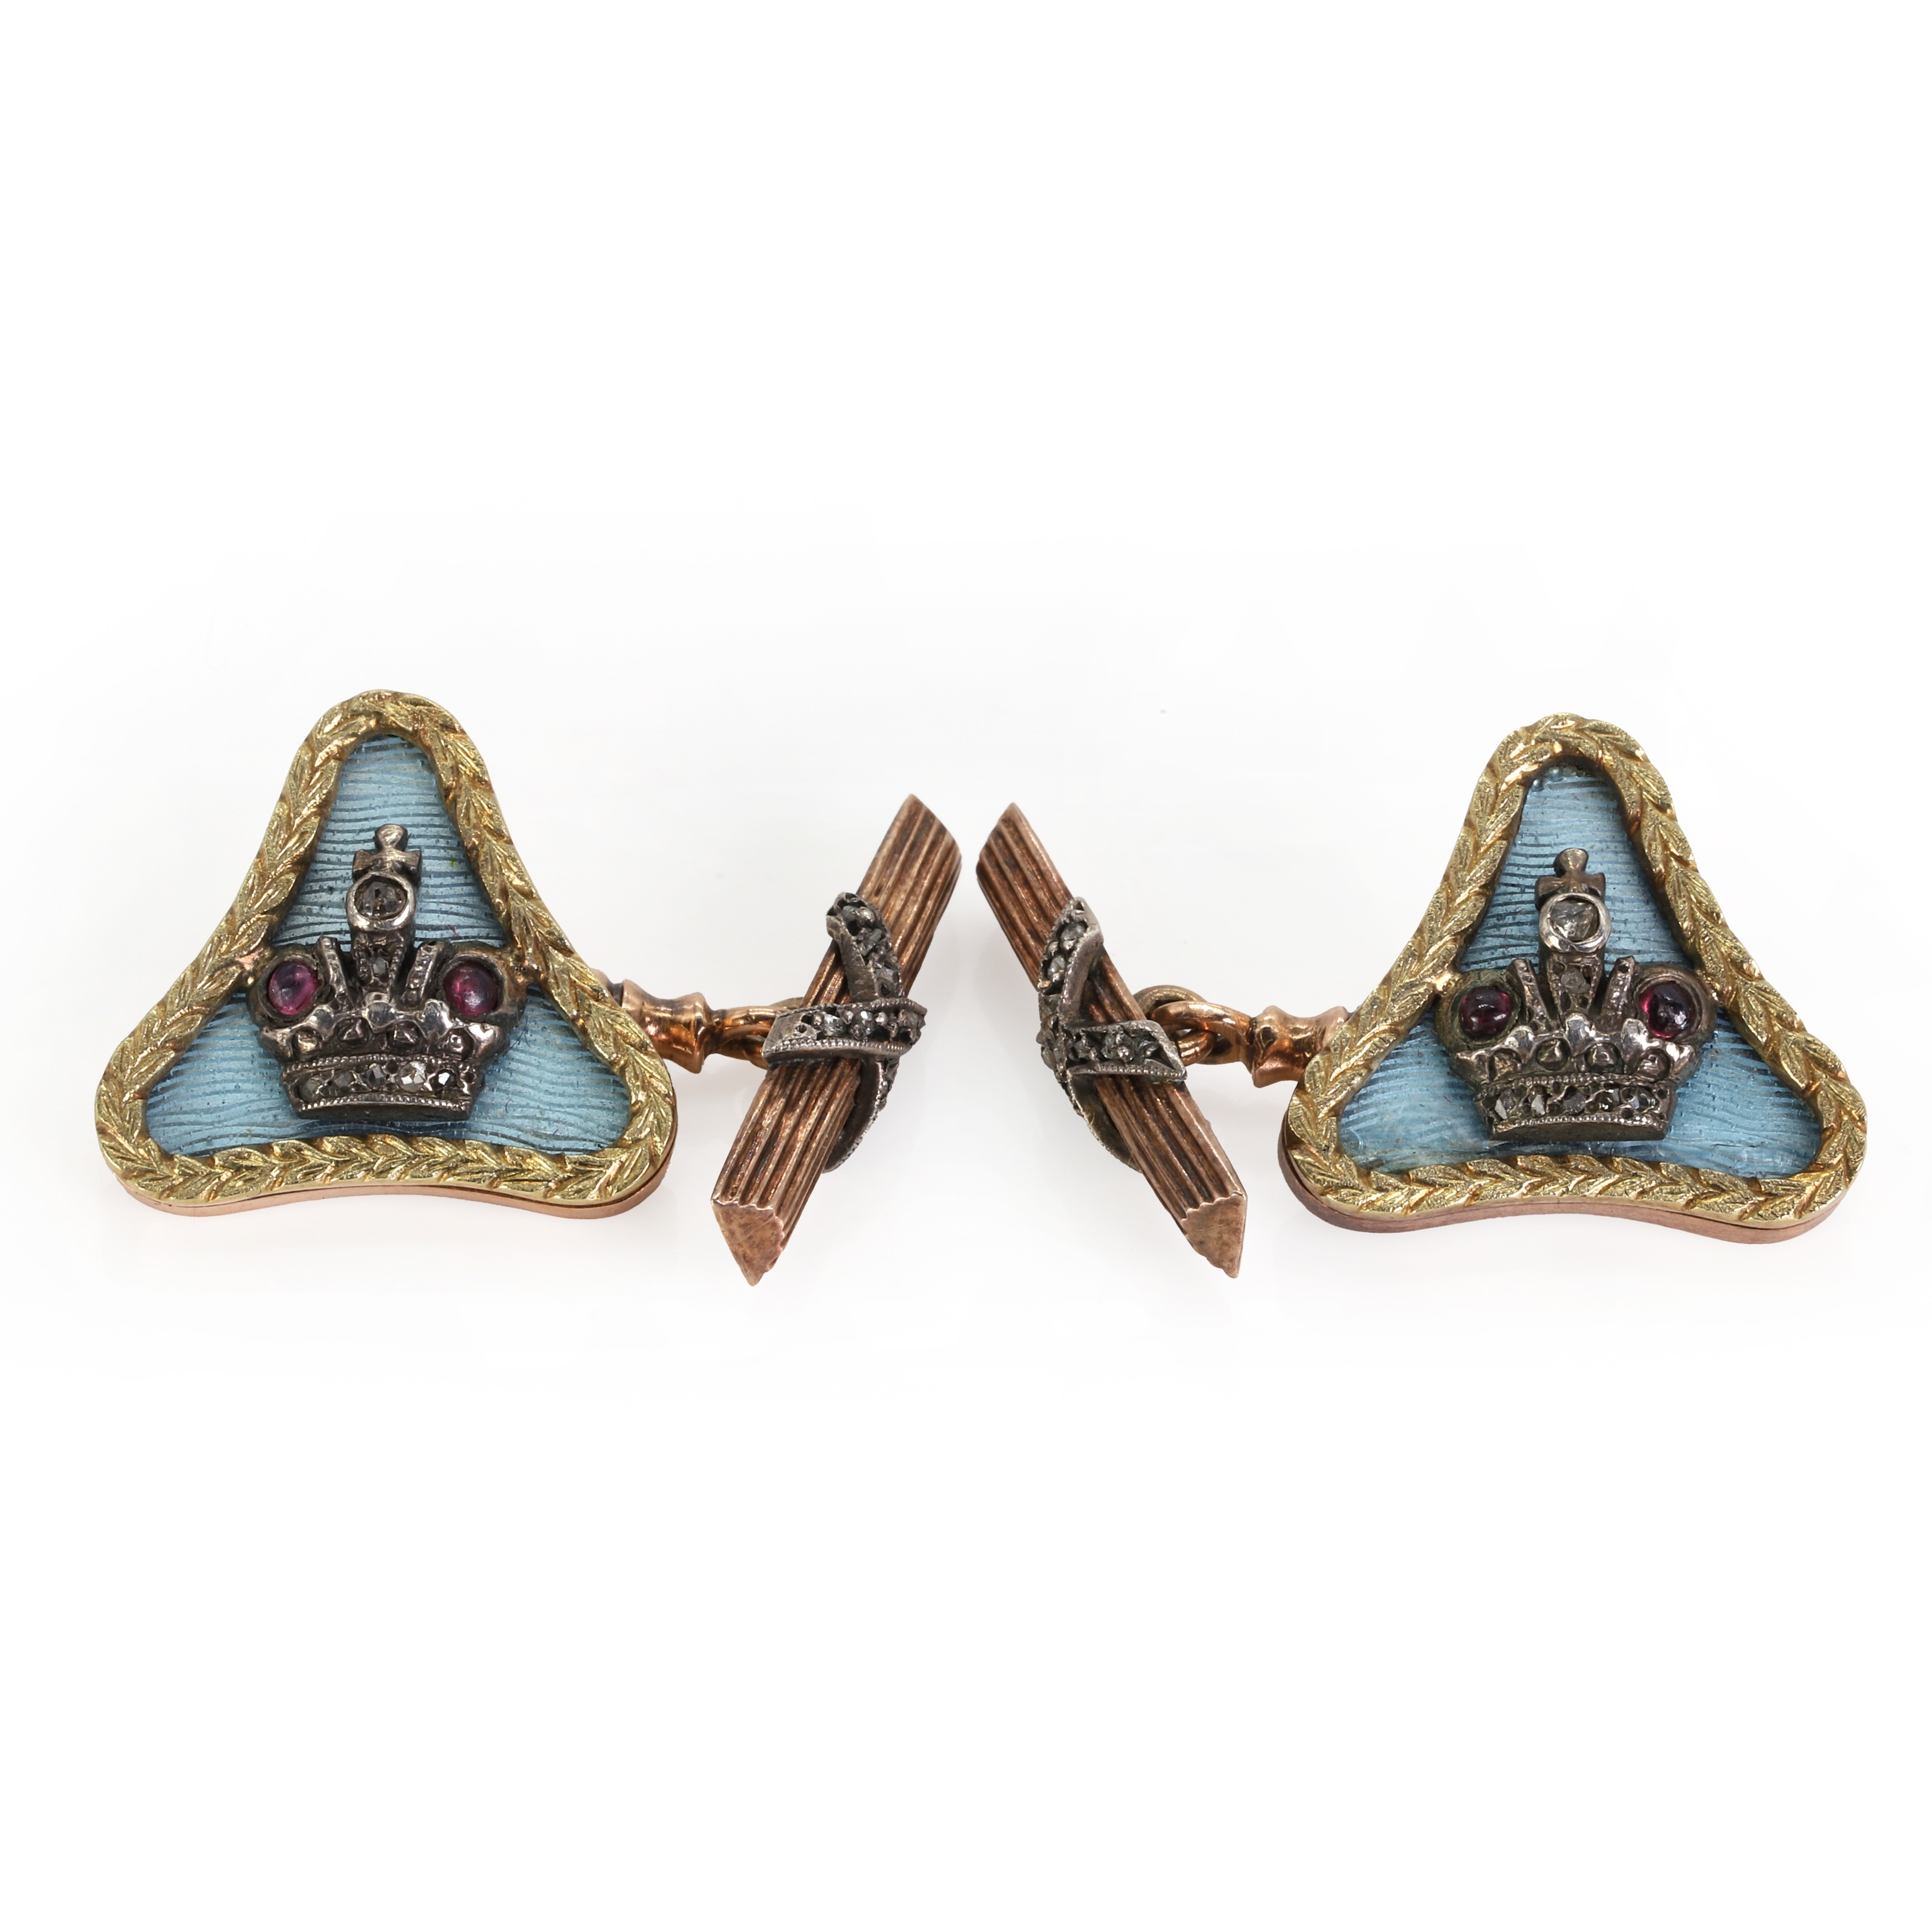 A pair of two-colour gold cufflinks by Fabergé, c.1880-1913 (£1,000-1,500)